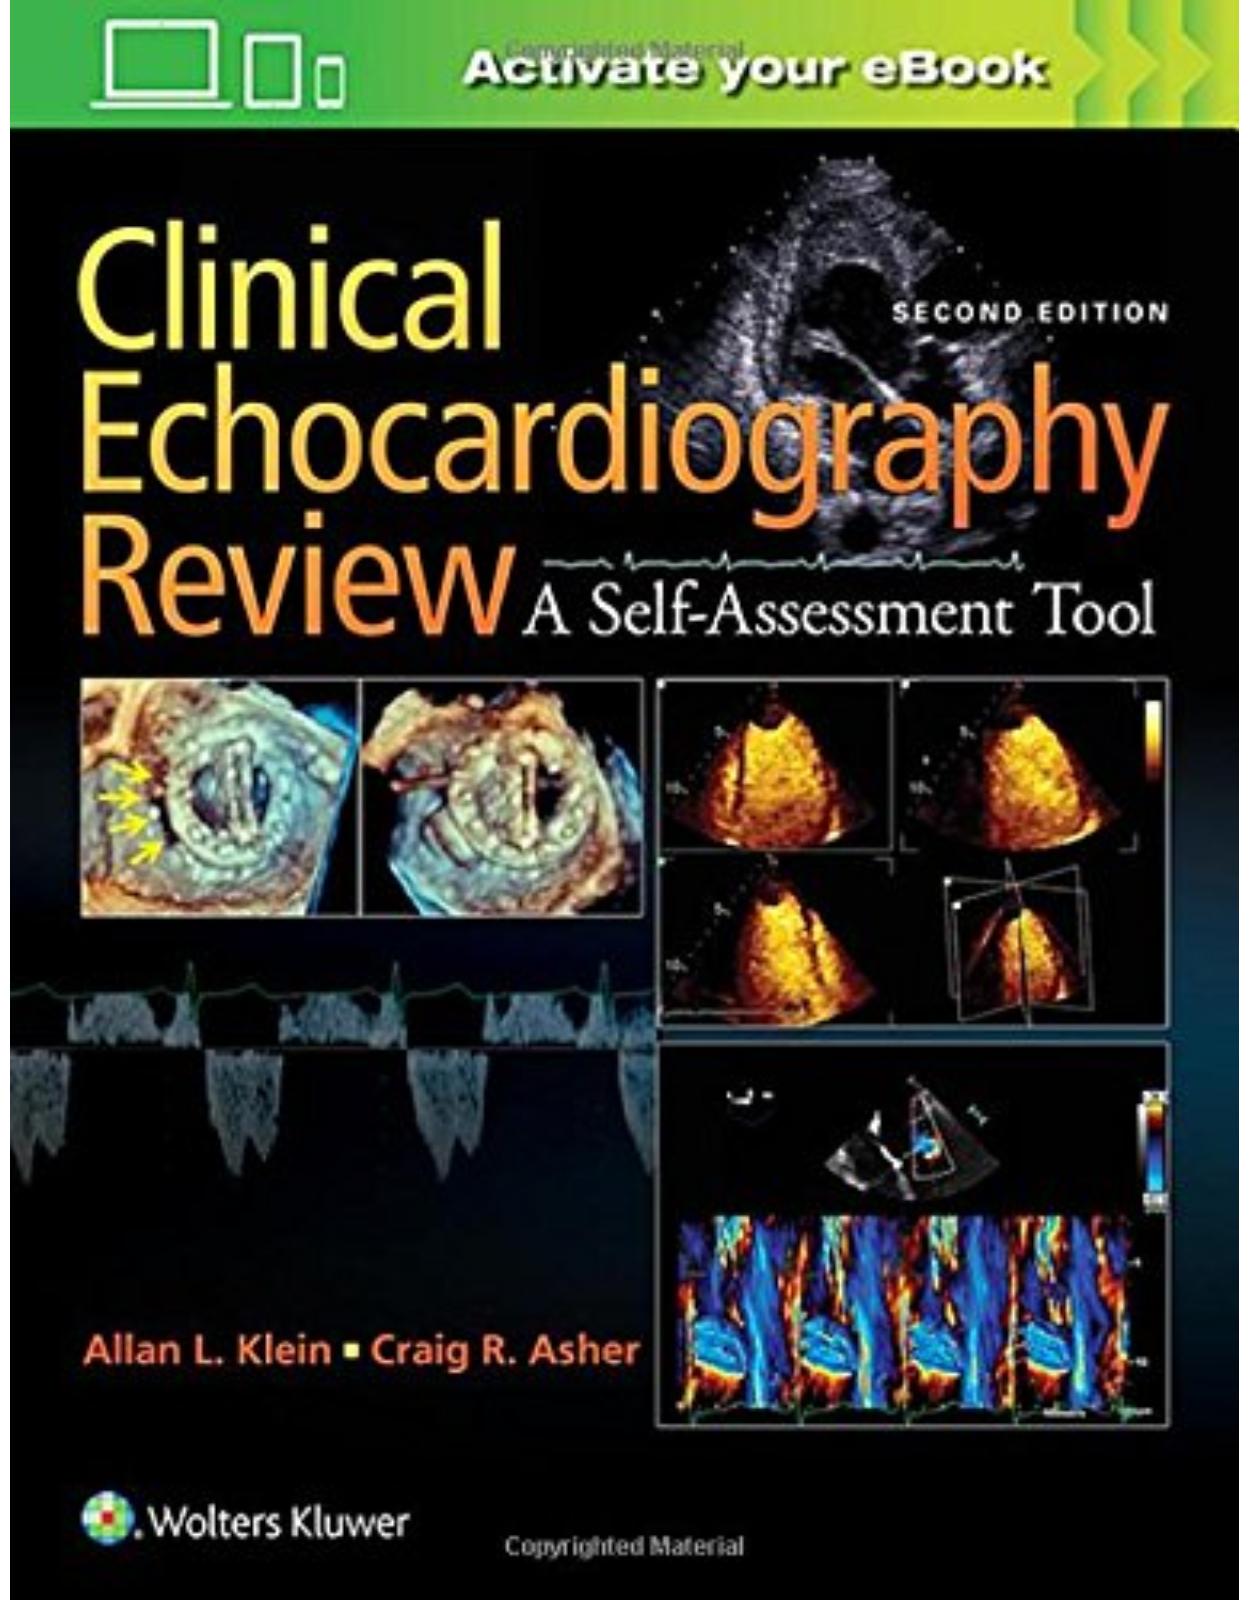 Clinical Echocardiography Review, 2e 